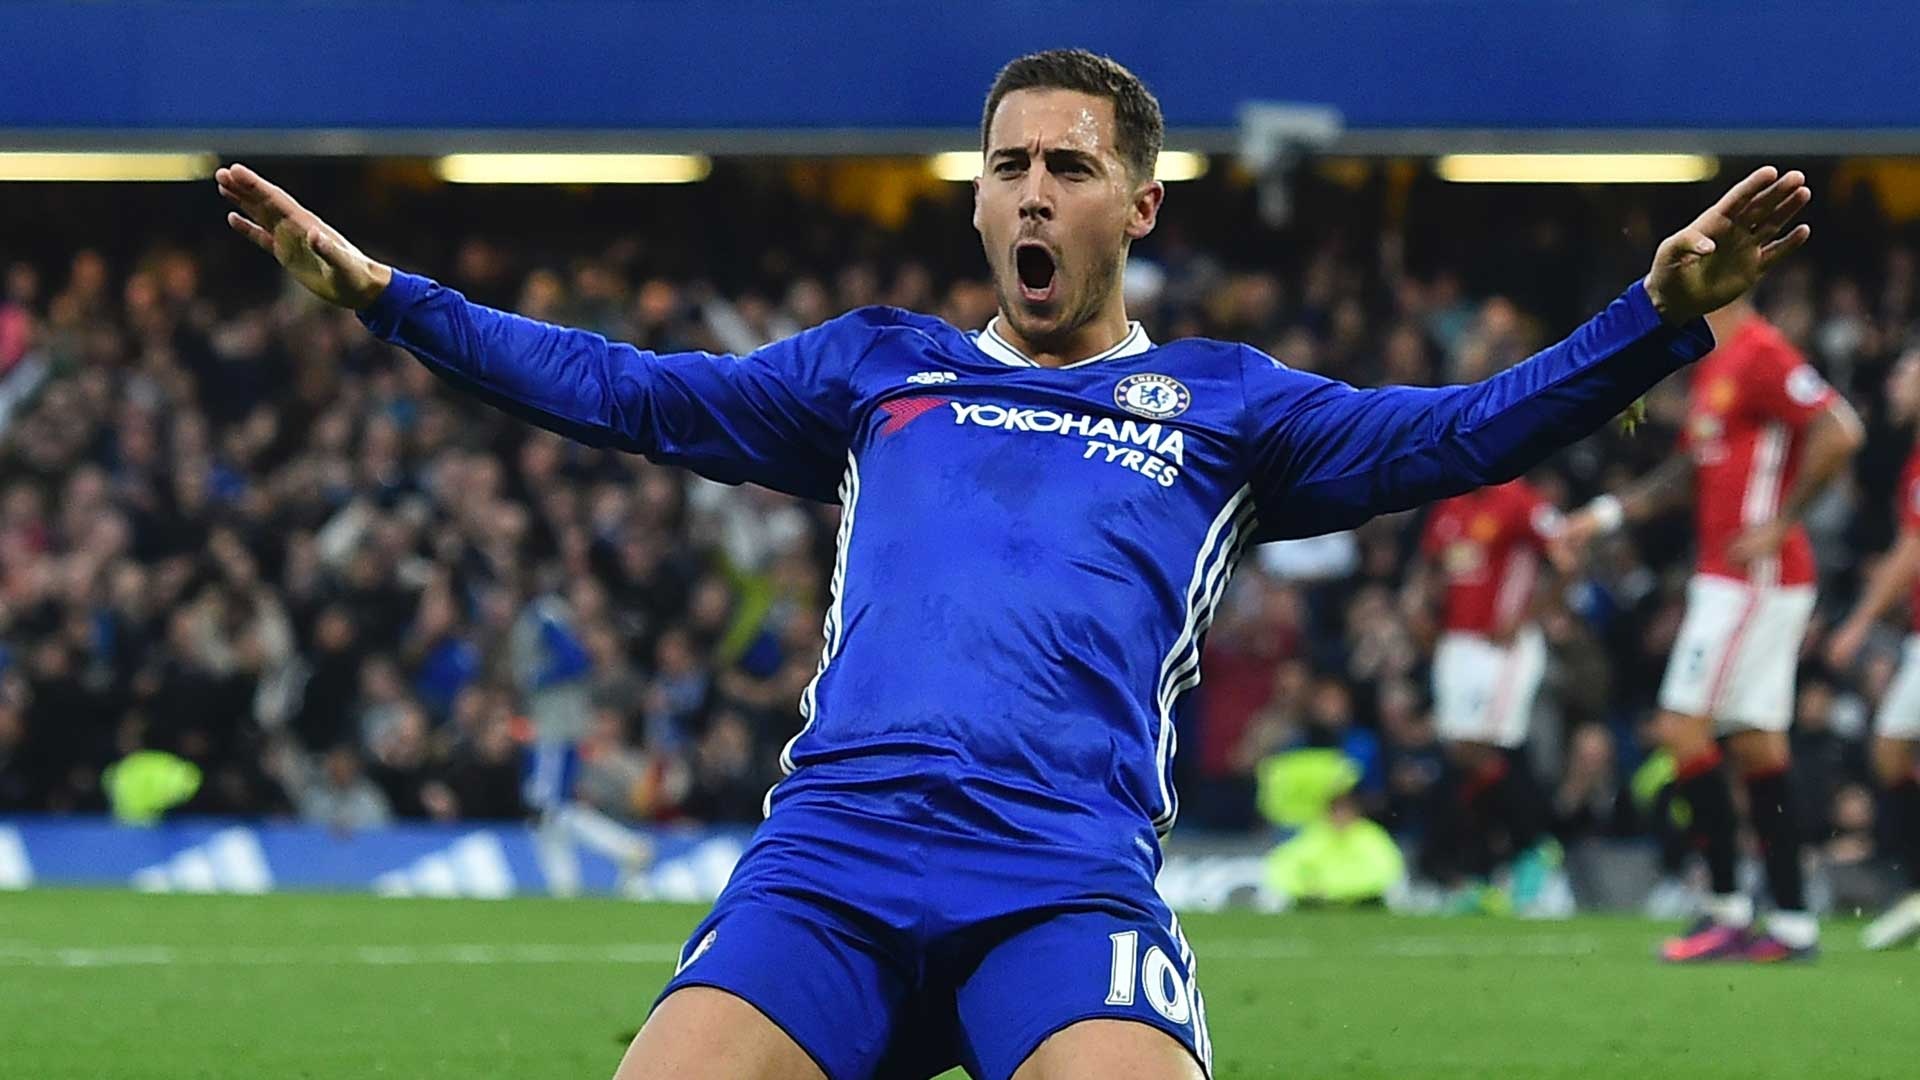 Chelsea hero Eden Hazard lined up for shock transfer but faces huge pay cut  